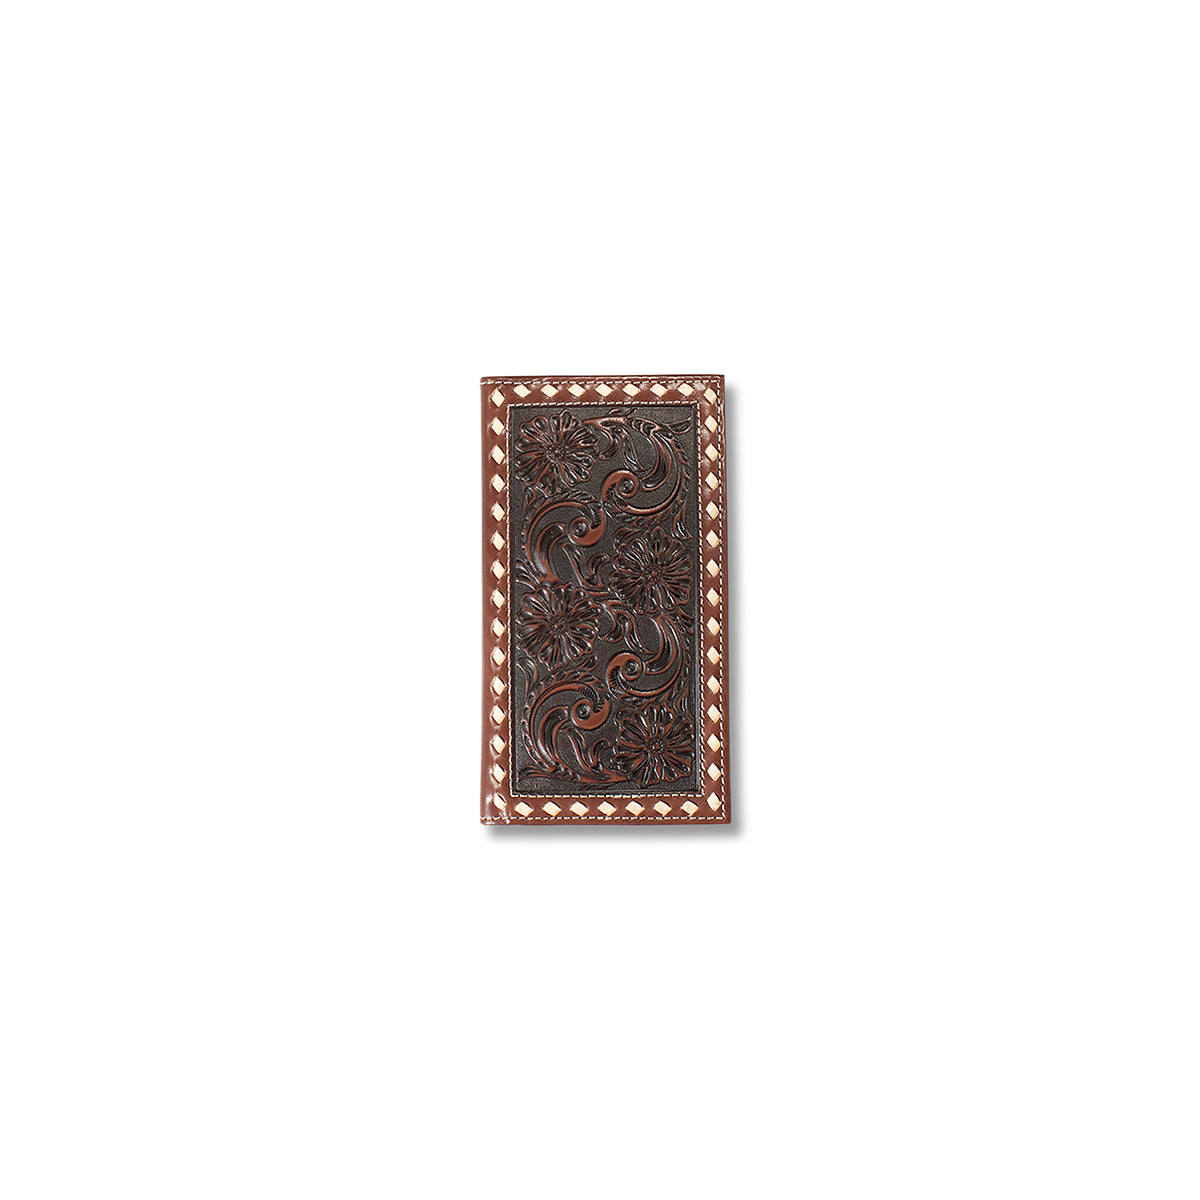 Ariat Rodeo Wallet Floral Embroidered Bucklace Brown